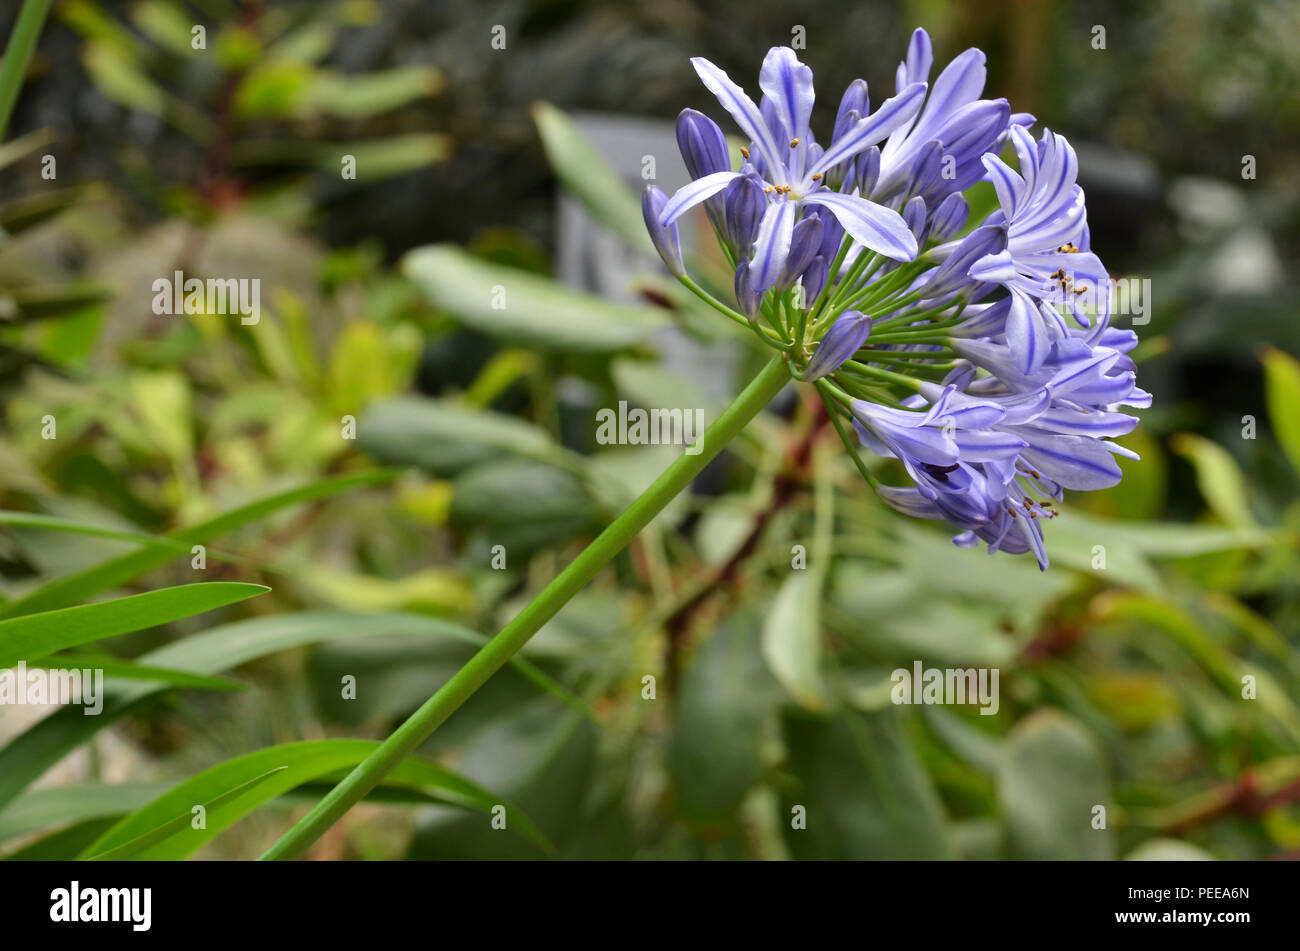 Blue and white blooming flowers of the Agapanthus in a border in the garden Stock Photo